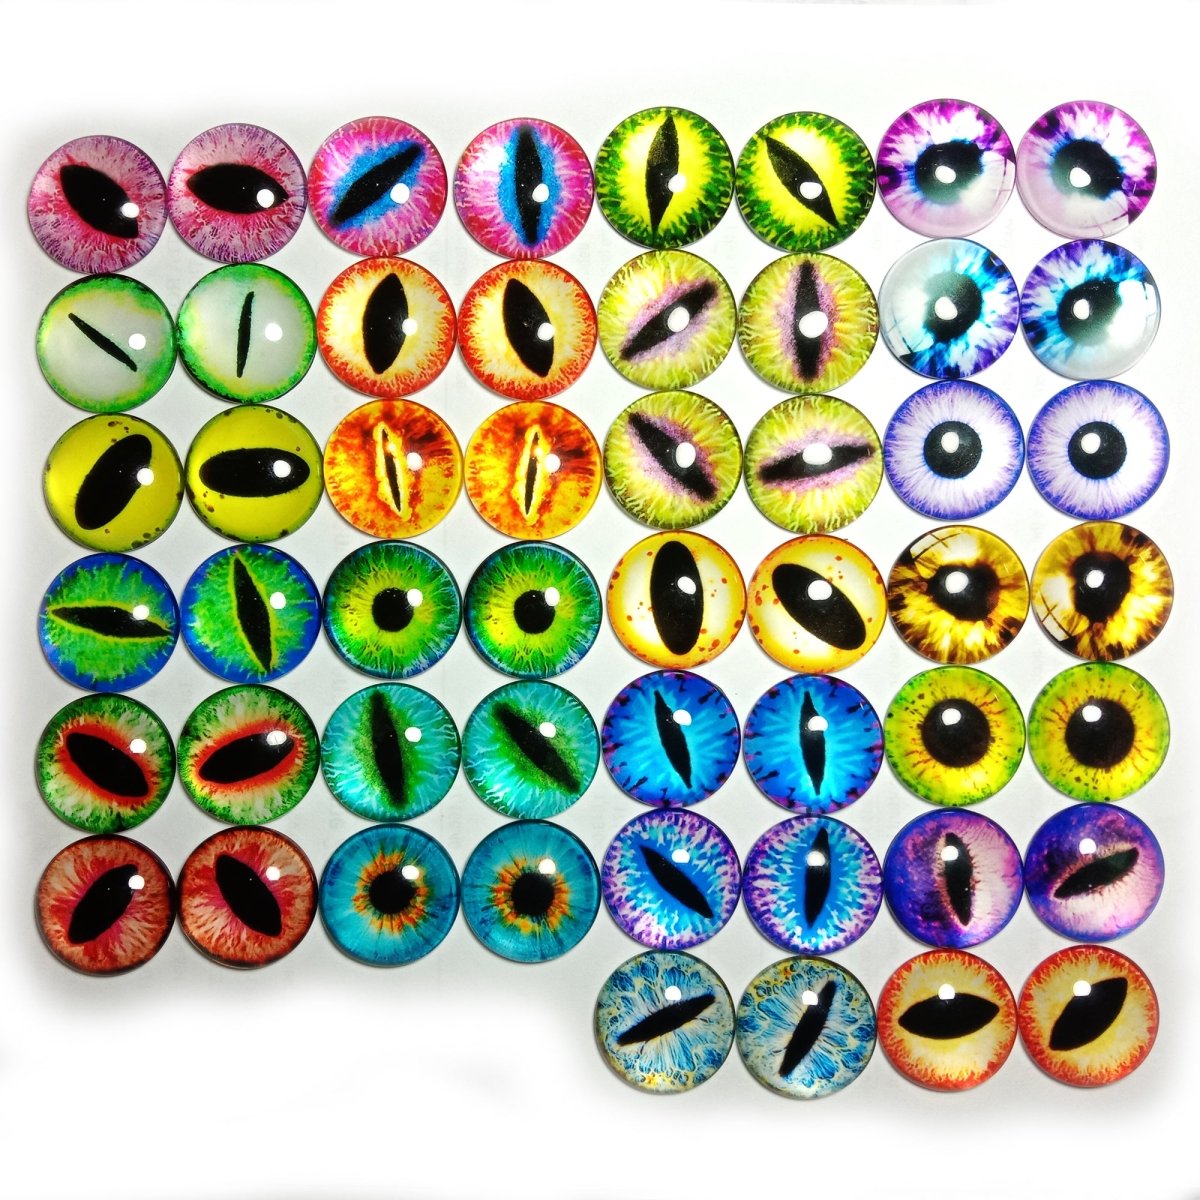 18mm 20mm 25mm 30mm Glass Eyes Dragon Lizard Frog Eyeballs As Pictured - 25mm 50pcs - - Asia Sell